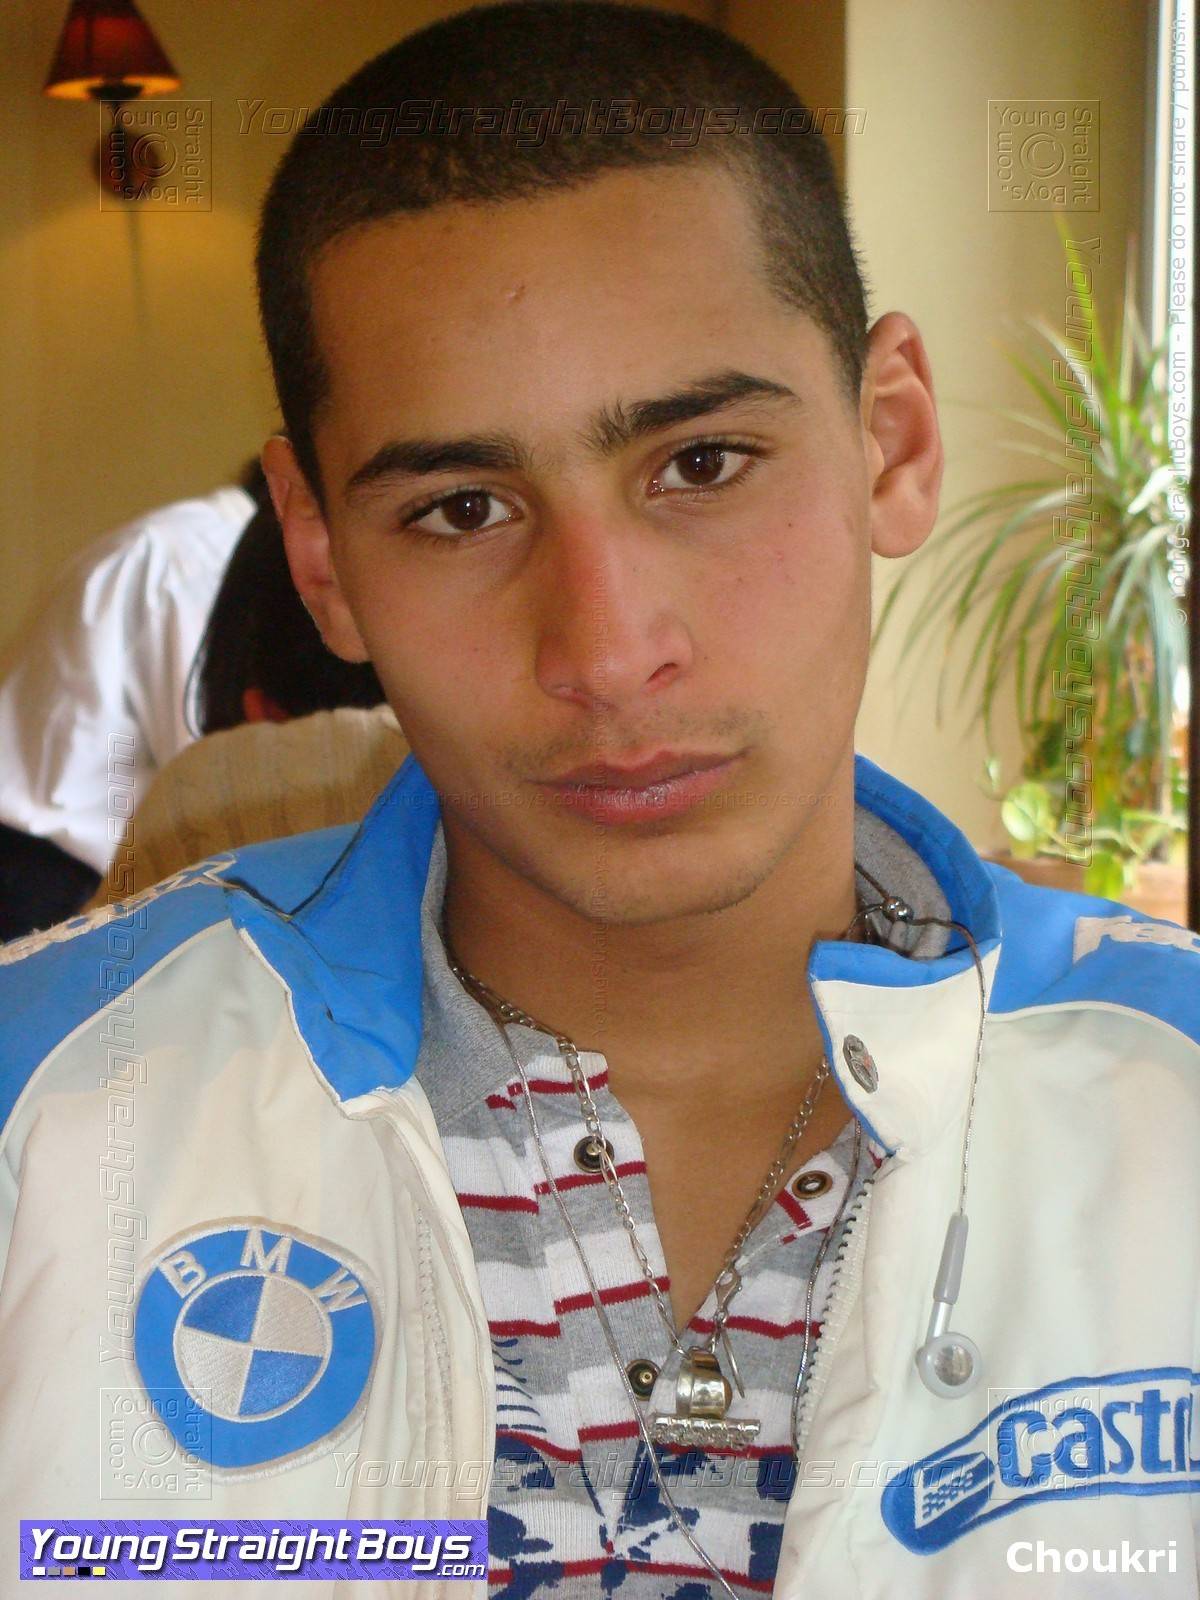 Cute 'street boy' of the Middle East in a café, with an angelic expression